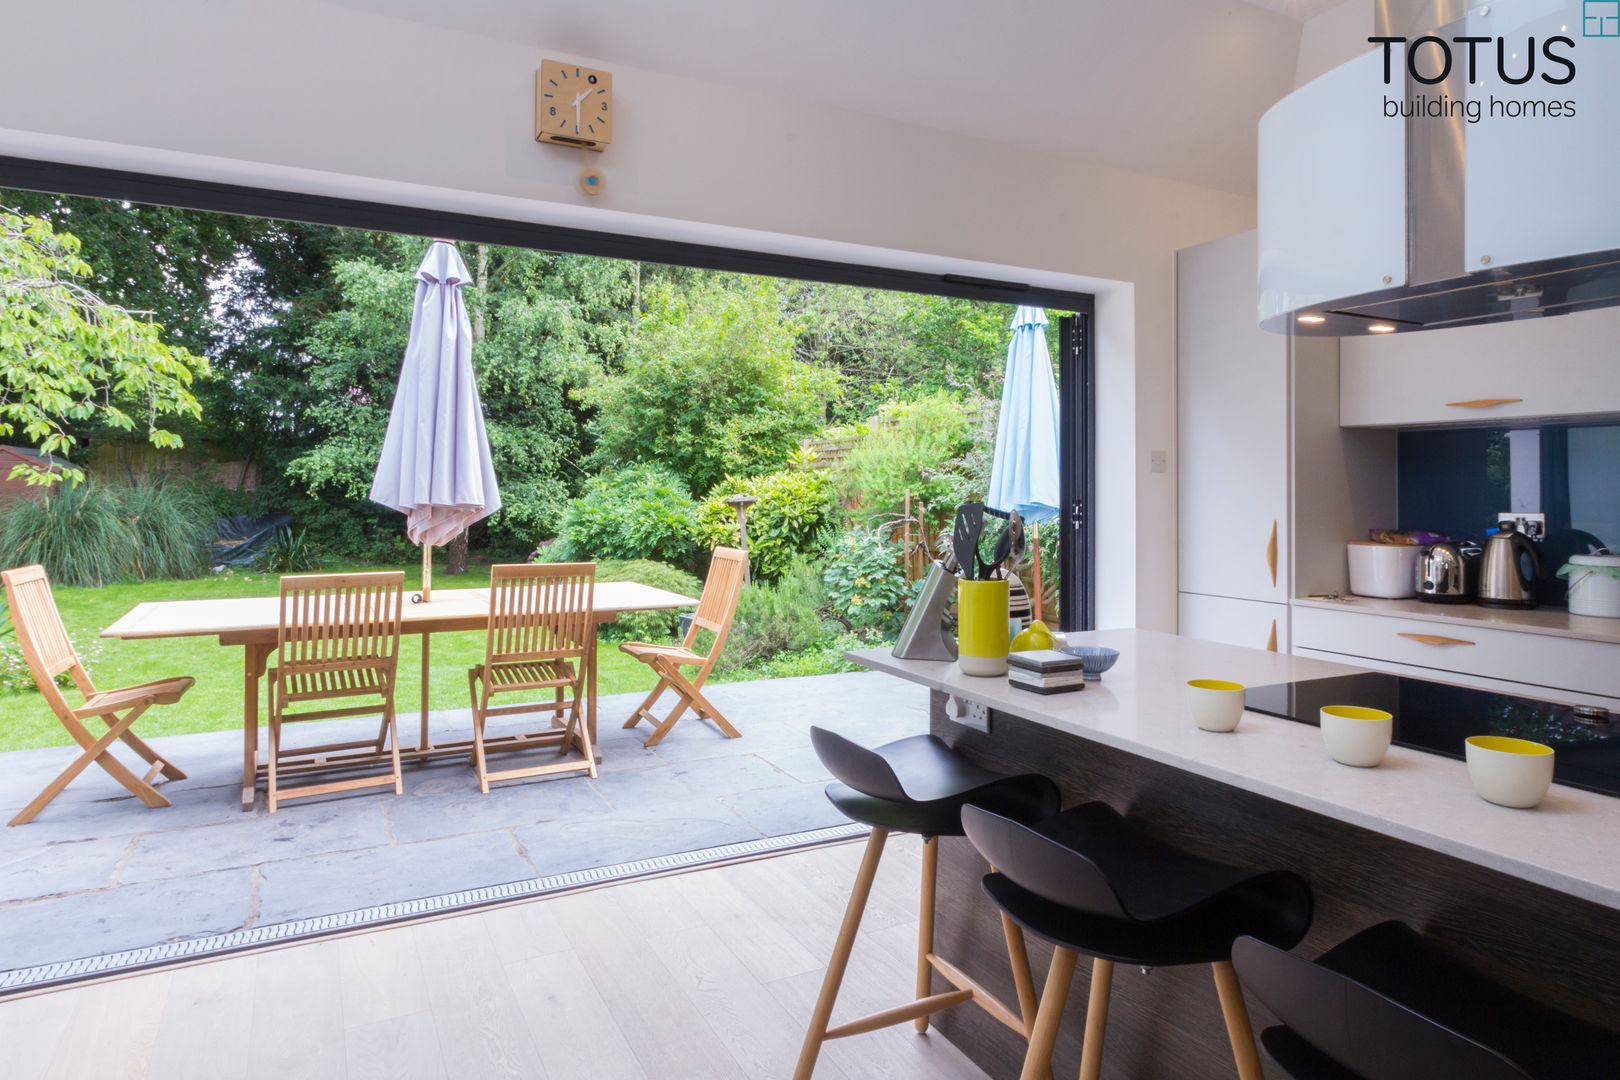 New life for a 1920s home - extension and full renovation, Thames Ditton, Surrey, TOTUS TOTUS مطبخ